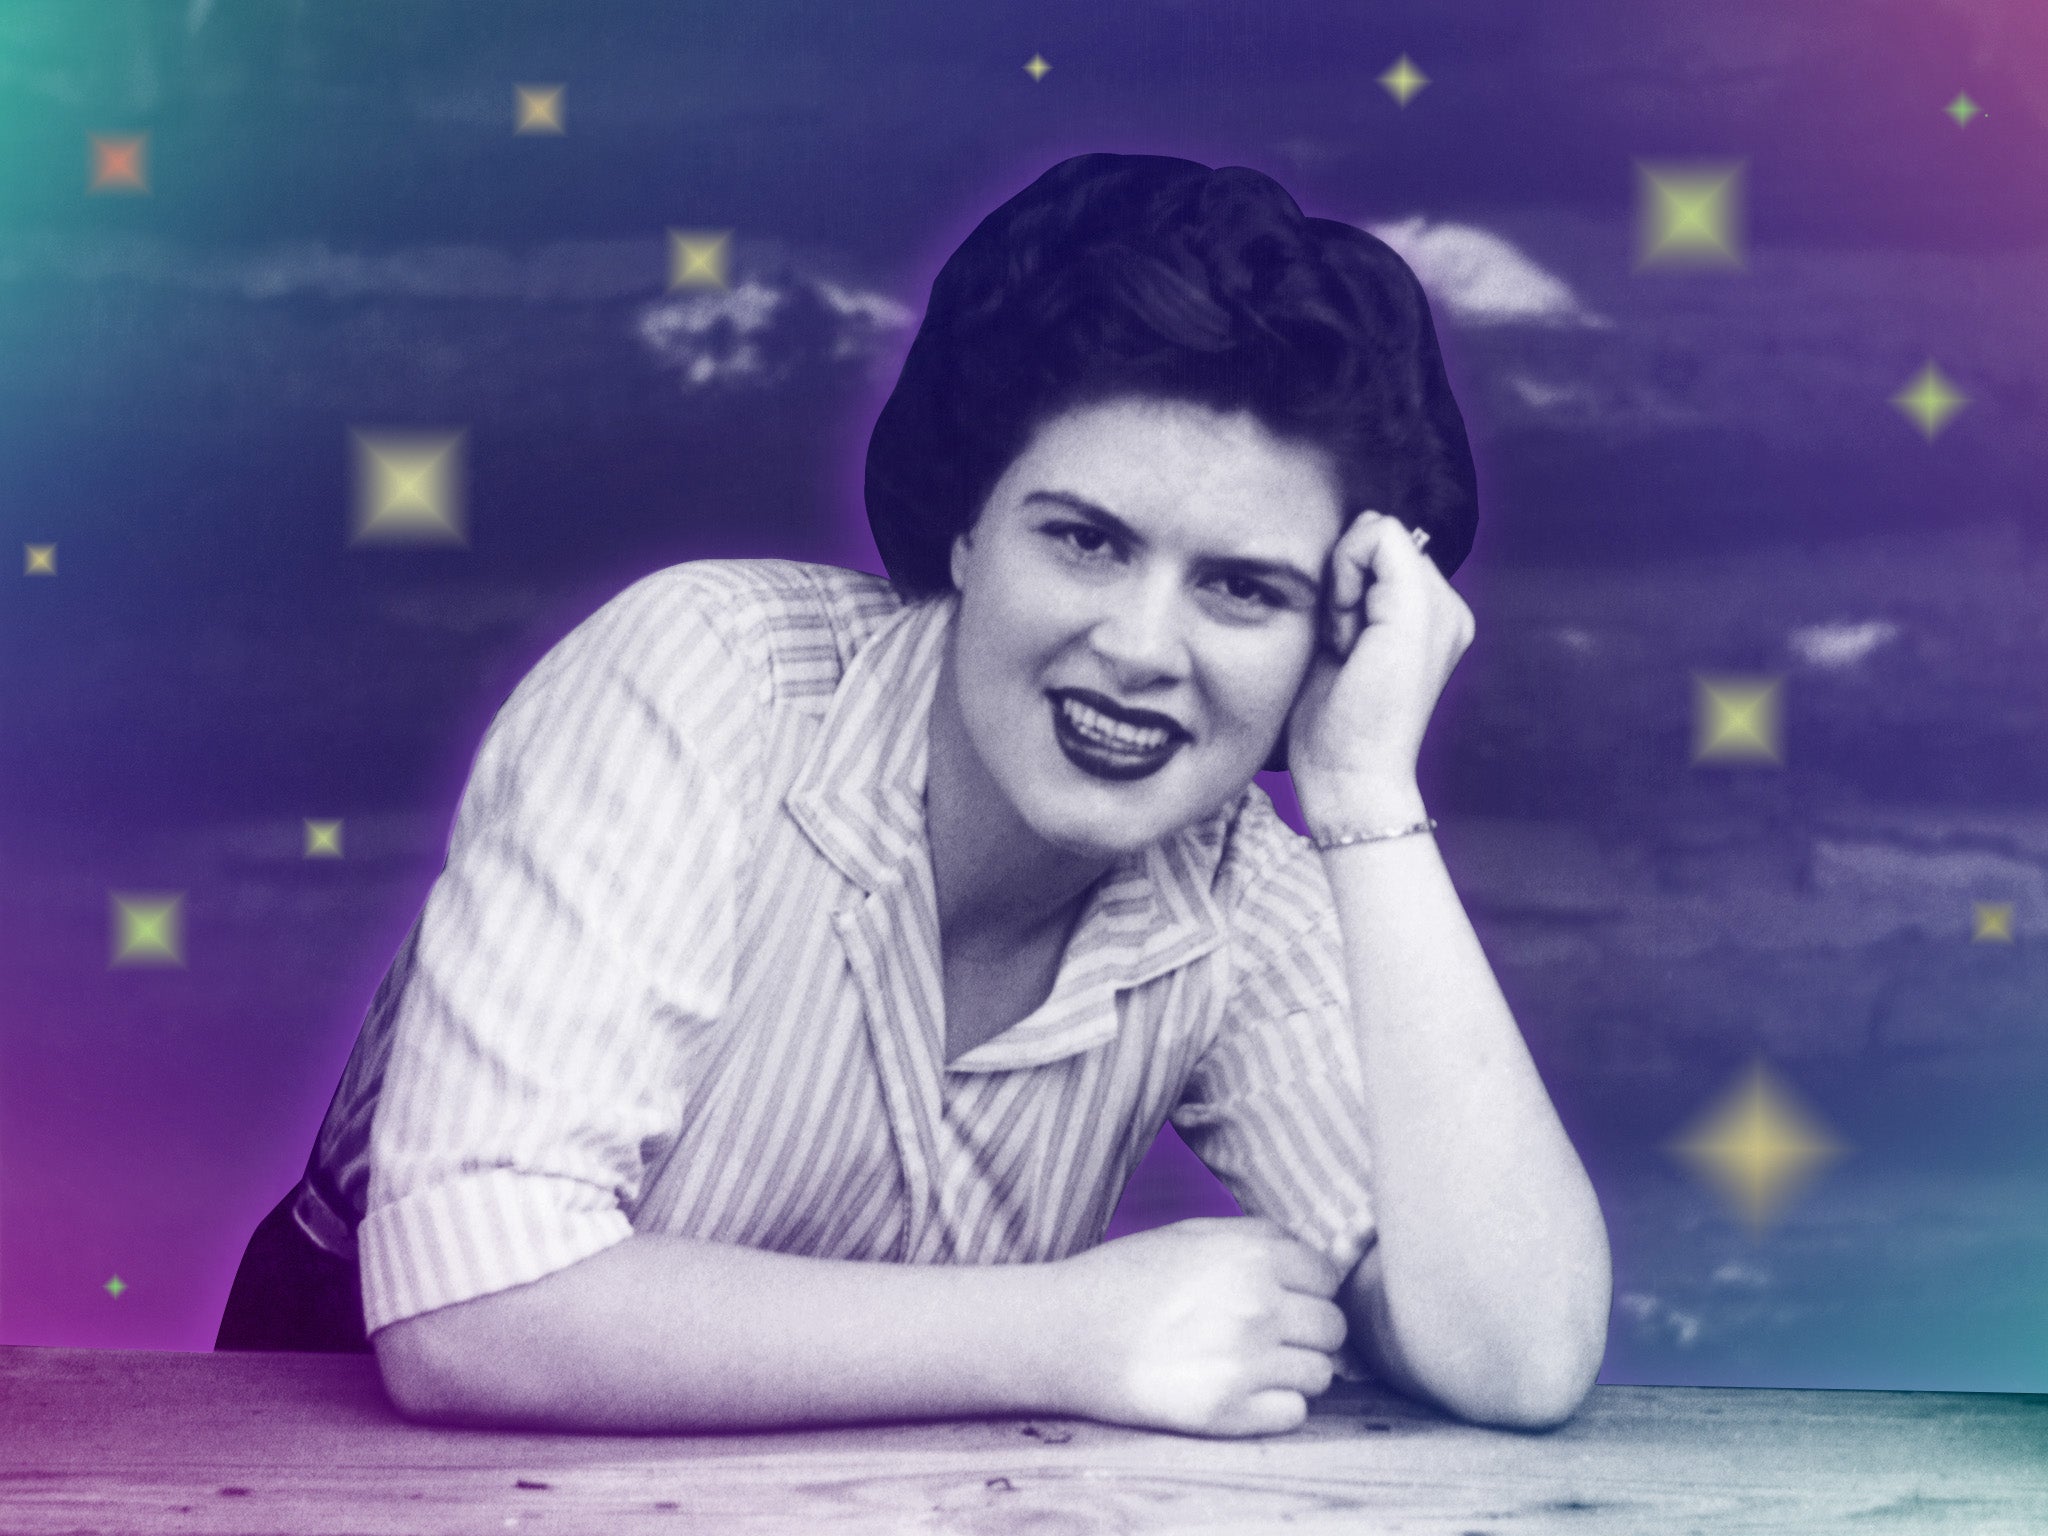 Patsy Cline died on 5 March 1963